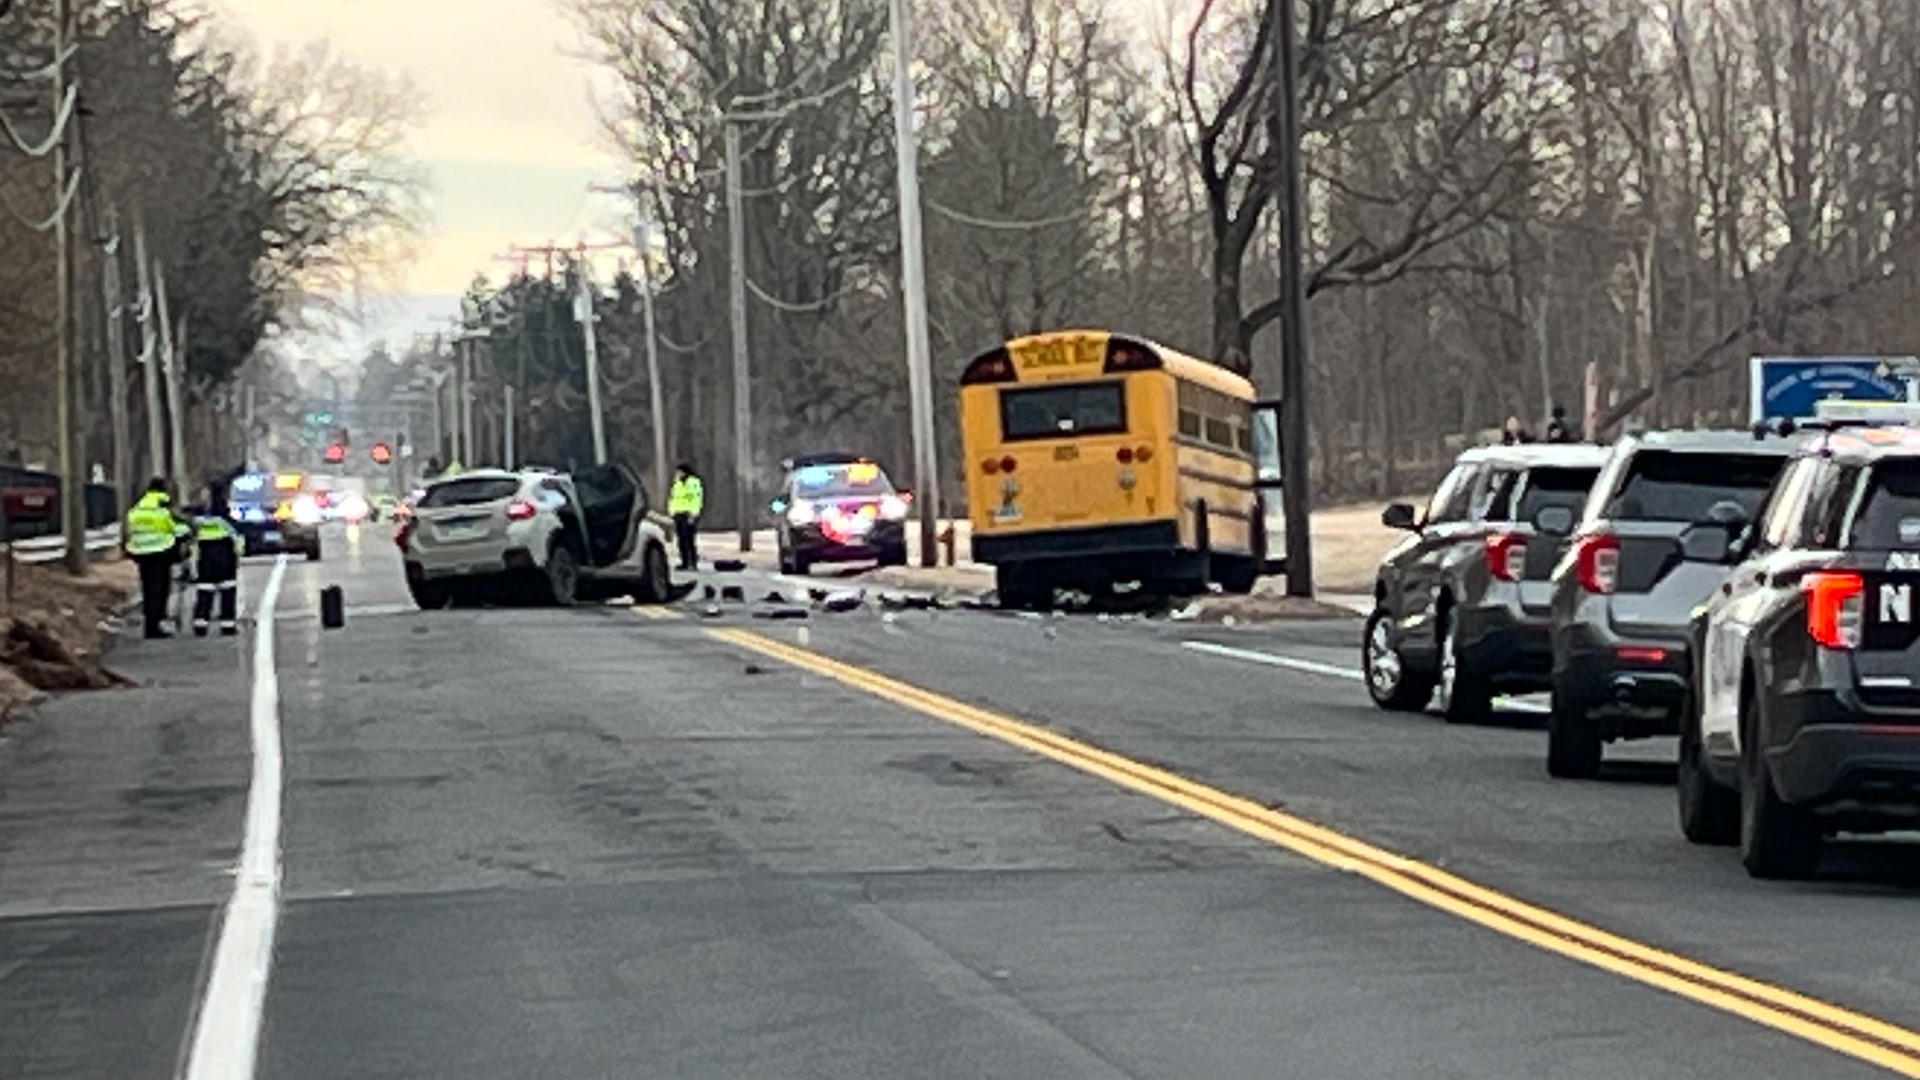 No students were on the bus, but the driver of the vehicle involved died from their injuries.